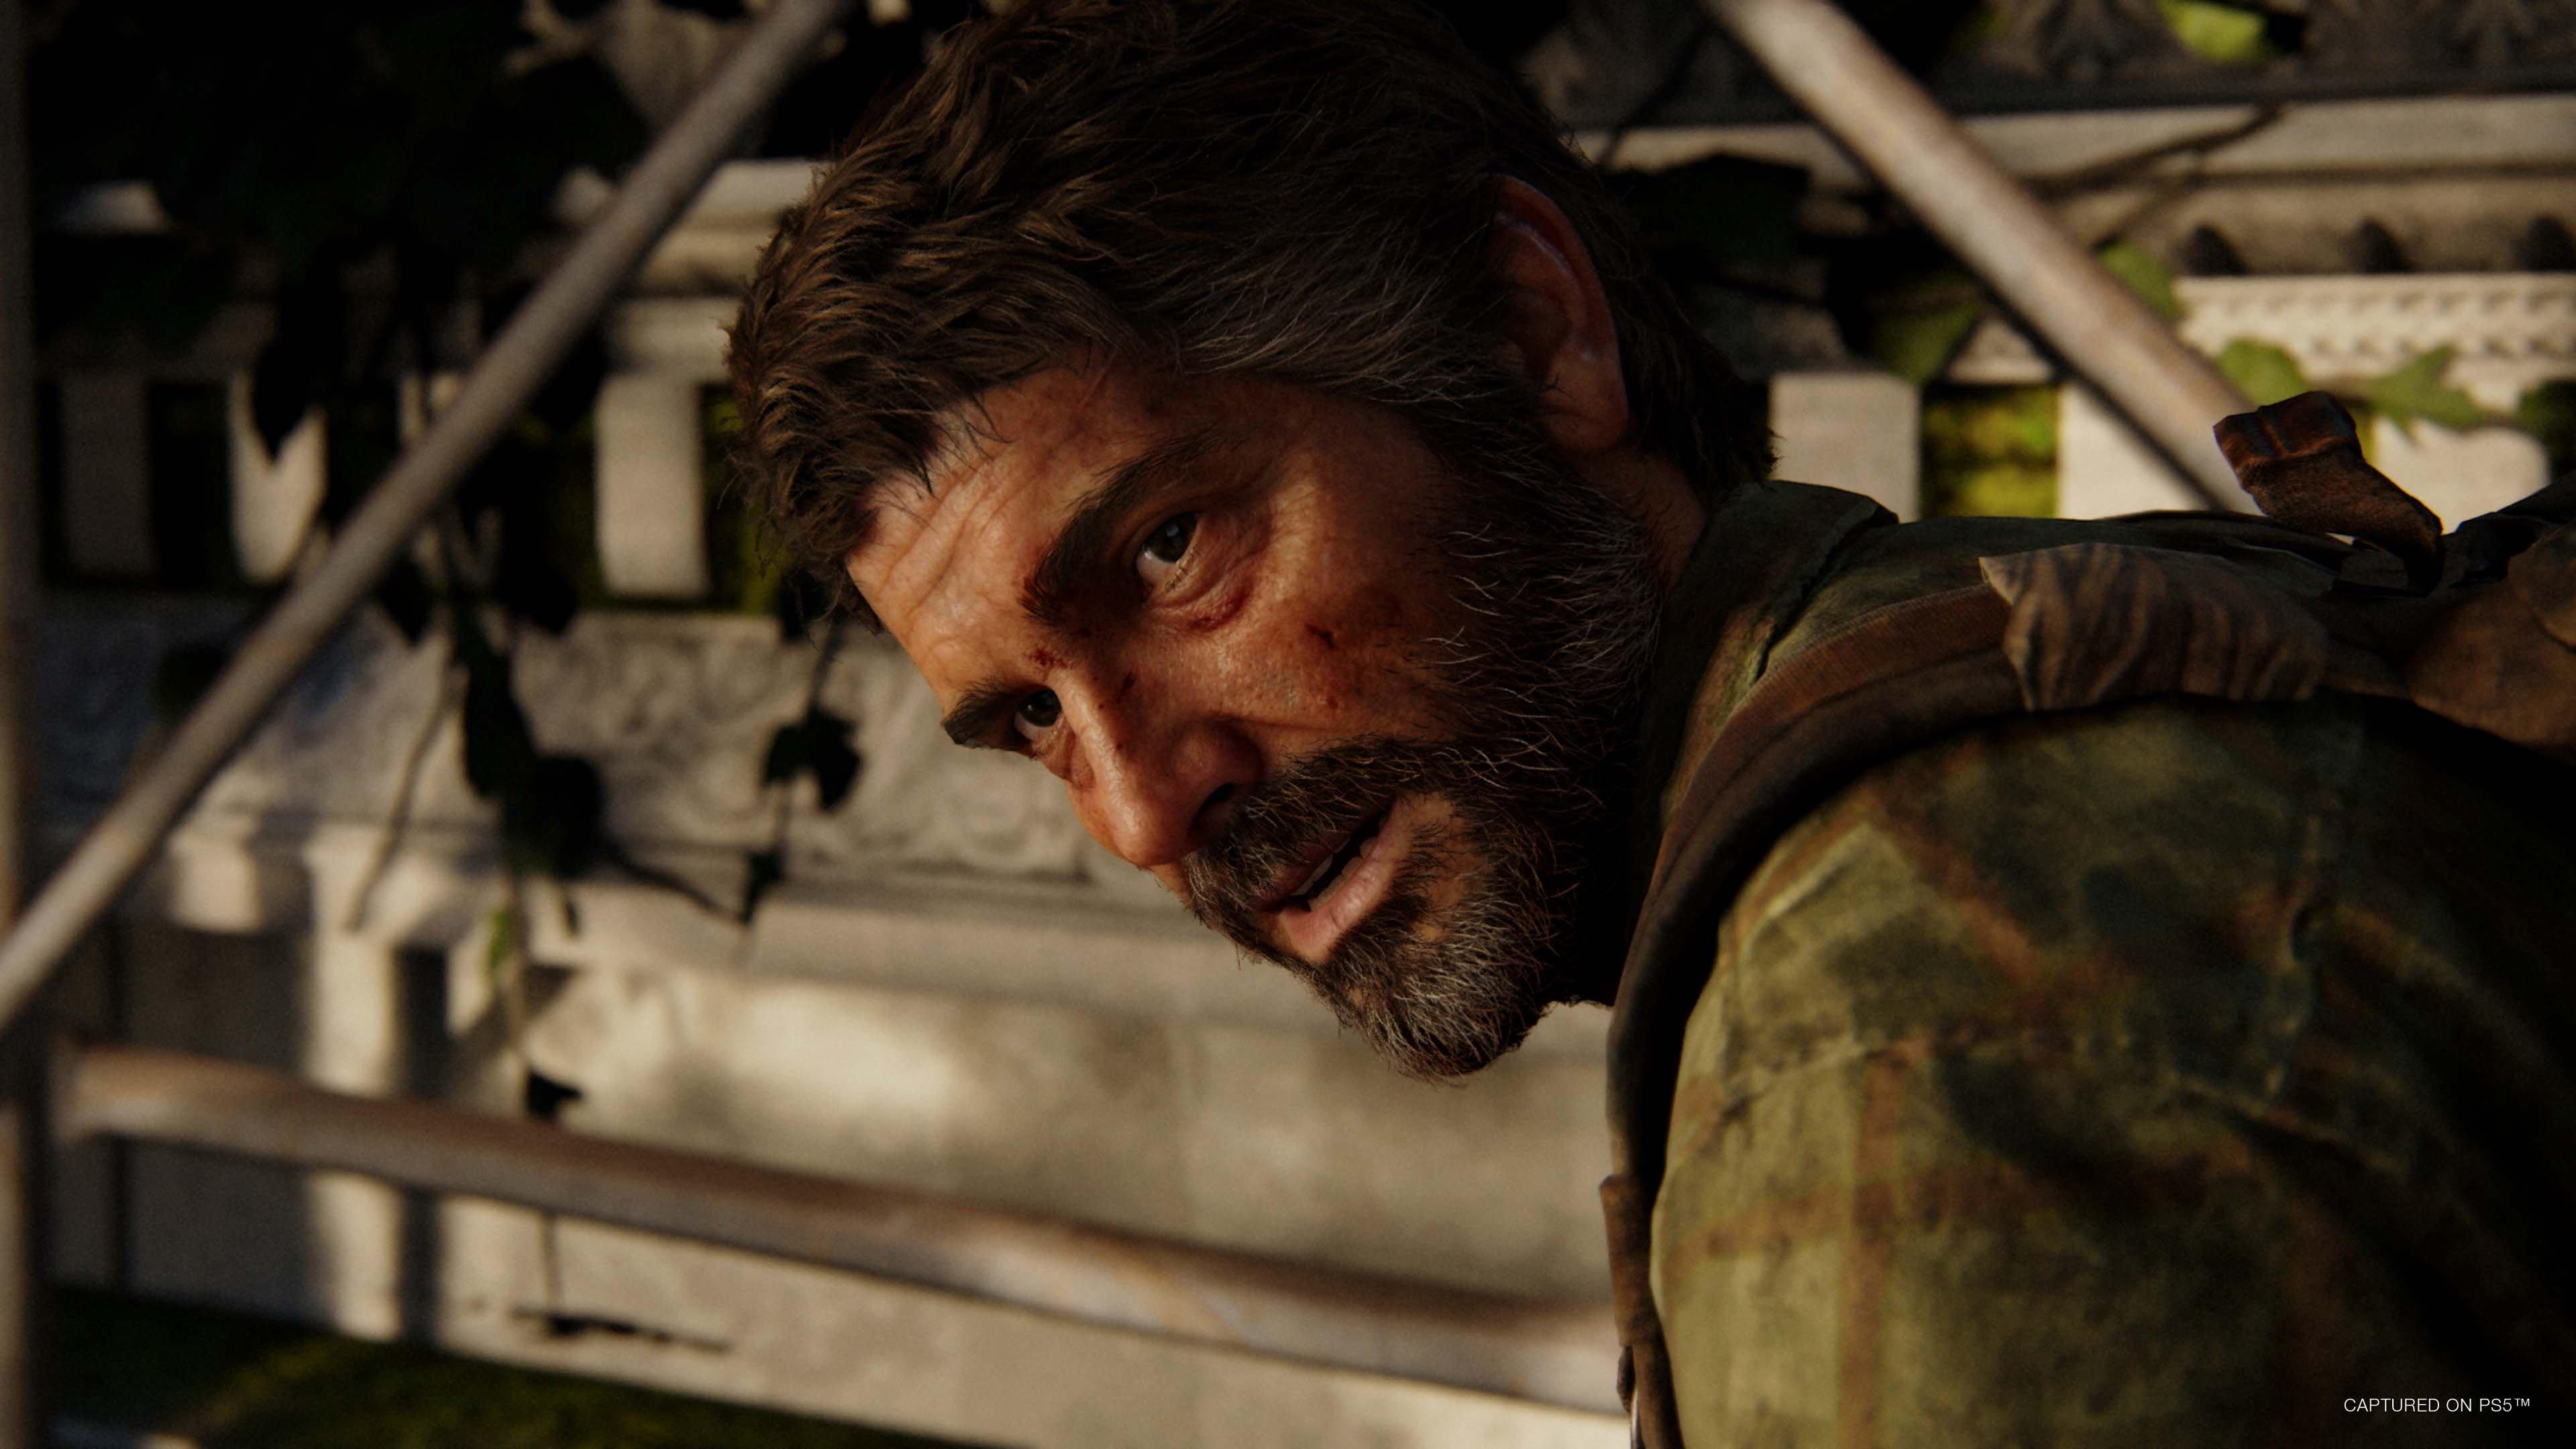 You're Loving the Show—Now Play The Last of Us Part I on PC for 10% off